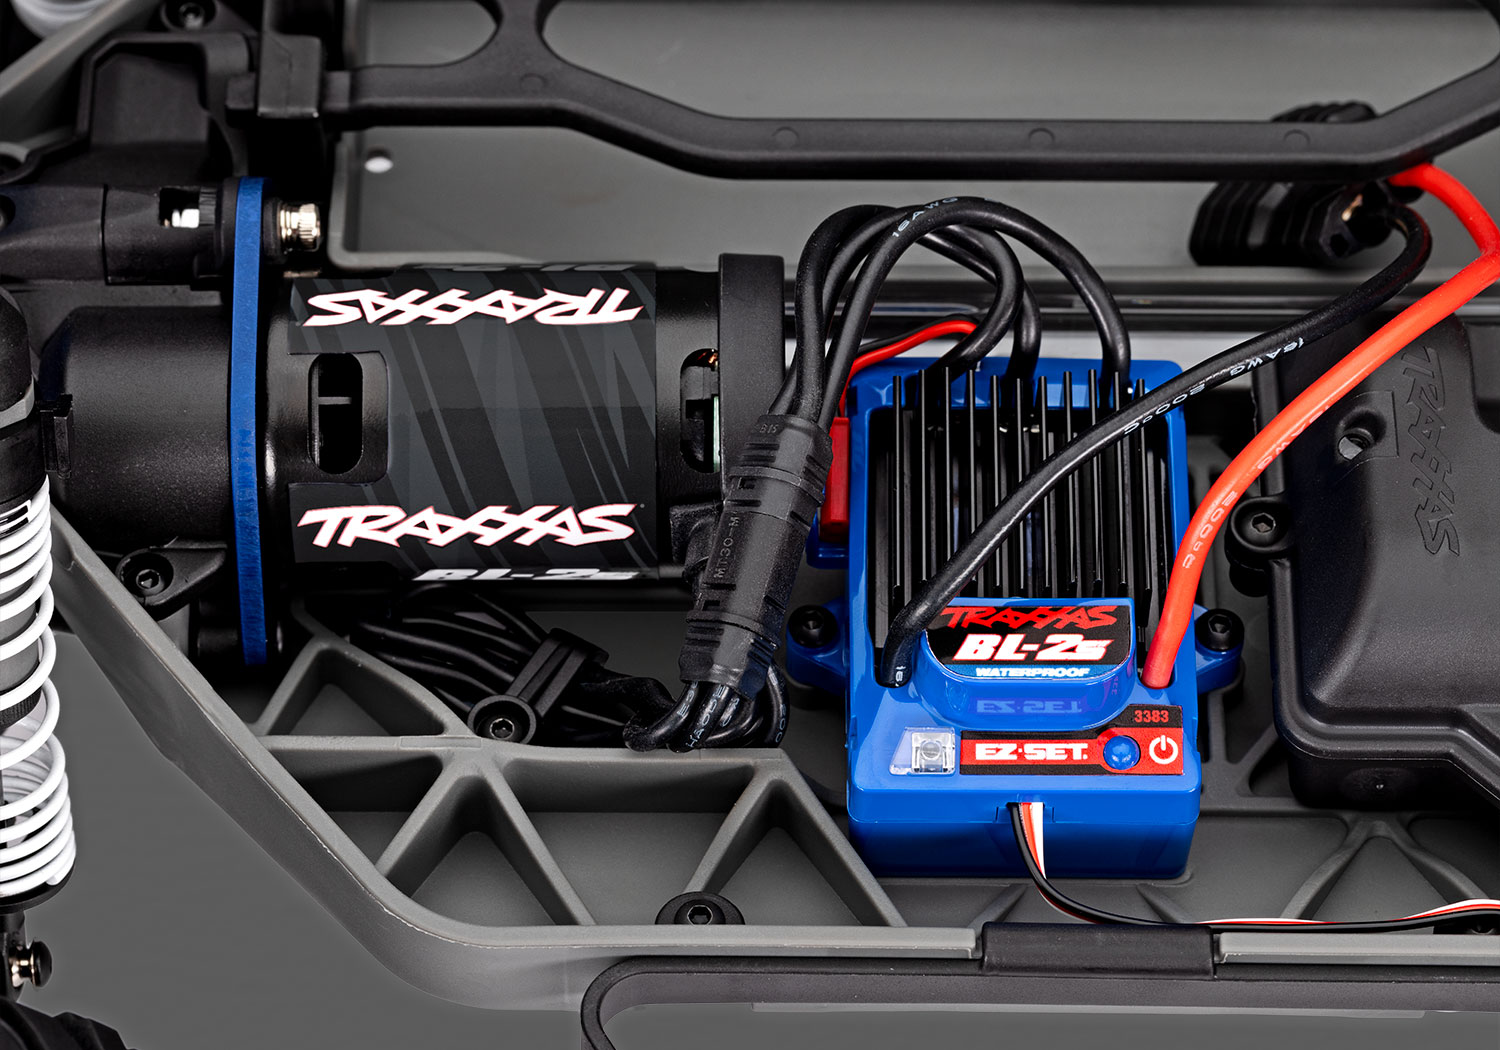 PACK ECO 100% RTR TRAXXAS SLASH 4X4 BRUSHLESS BL-2S LIPO 2S CHARGEUR RAPIDE SAC OFFERT